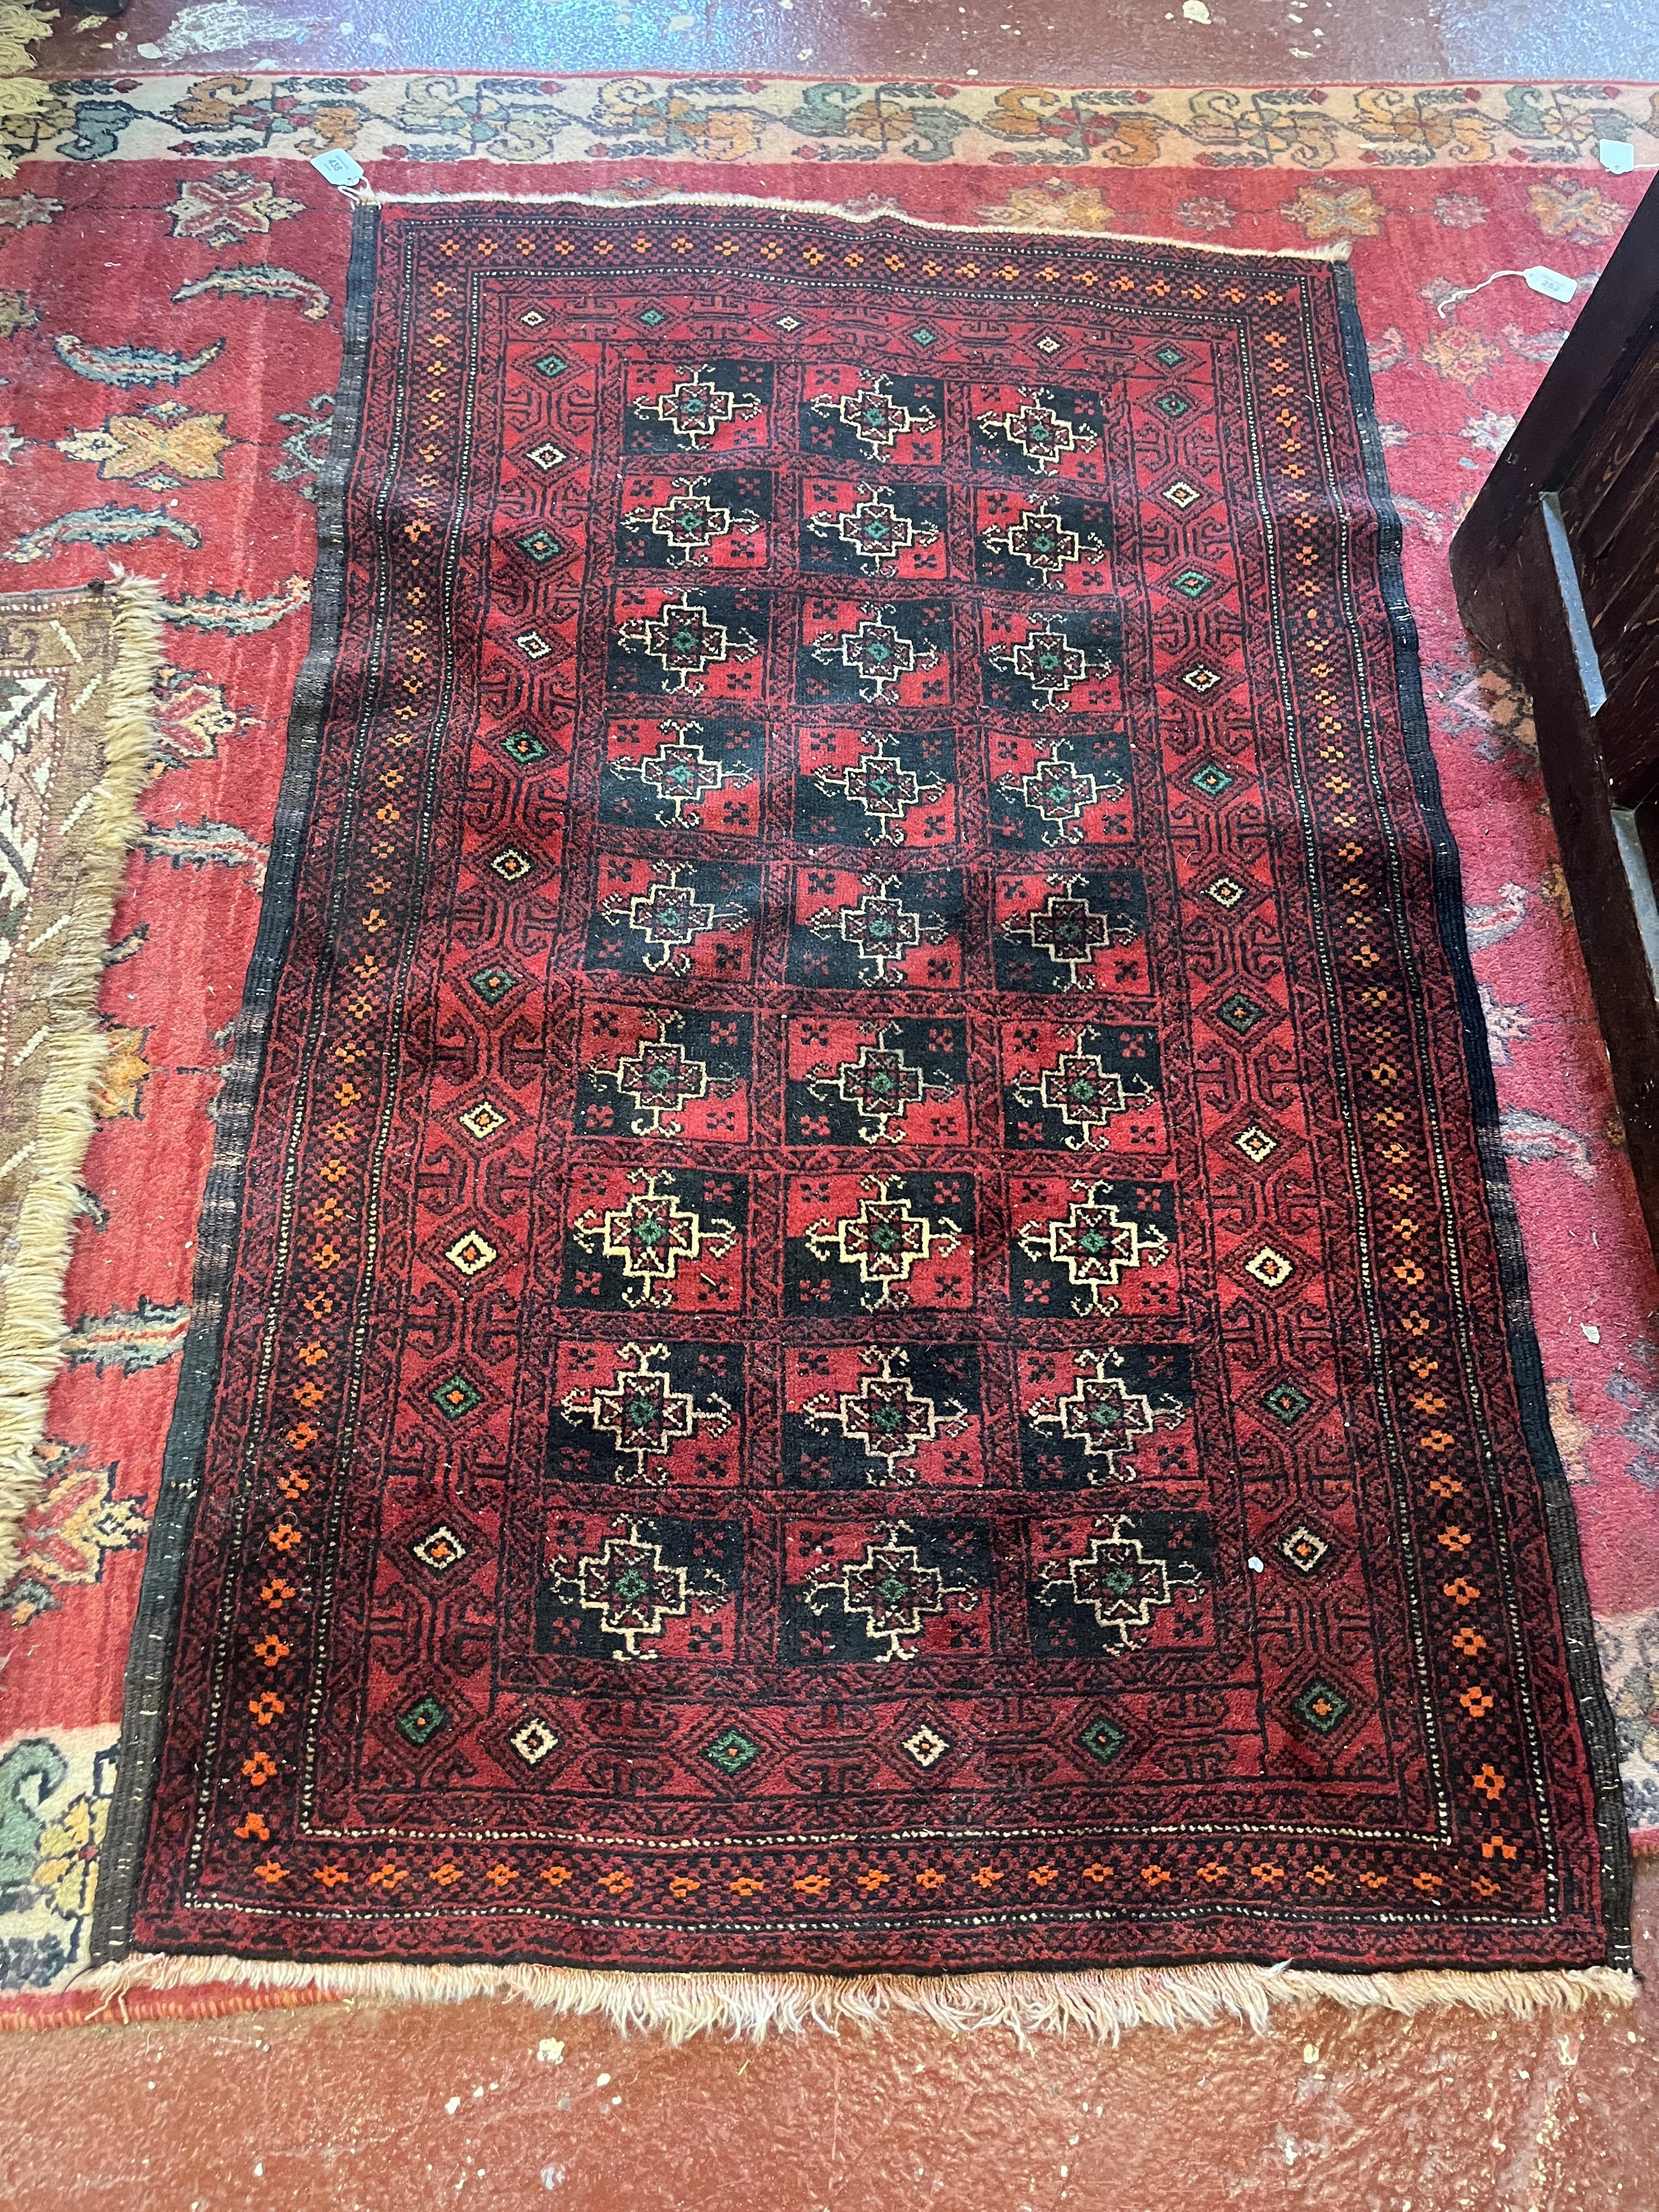 Vintage Afghan wool hand woven rug - Approx size: 140cm x 87cm - Image 2 of 3